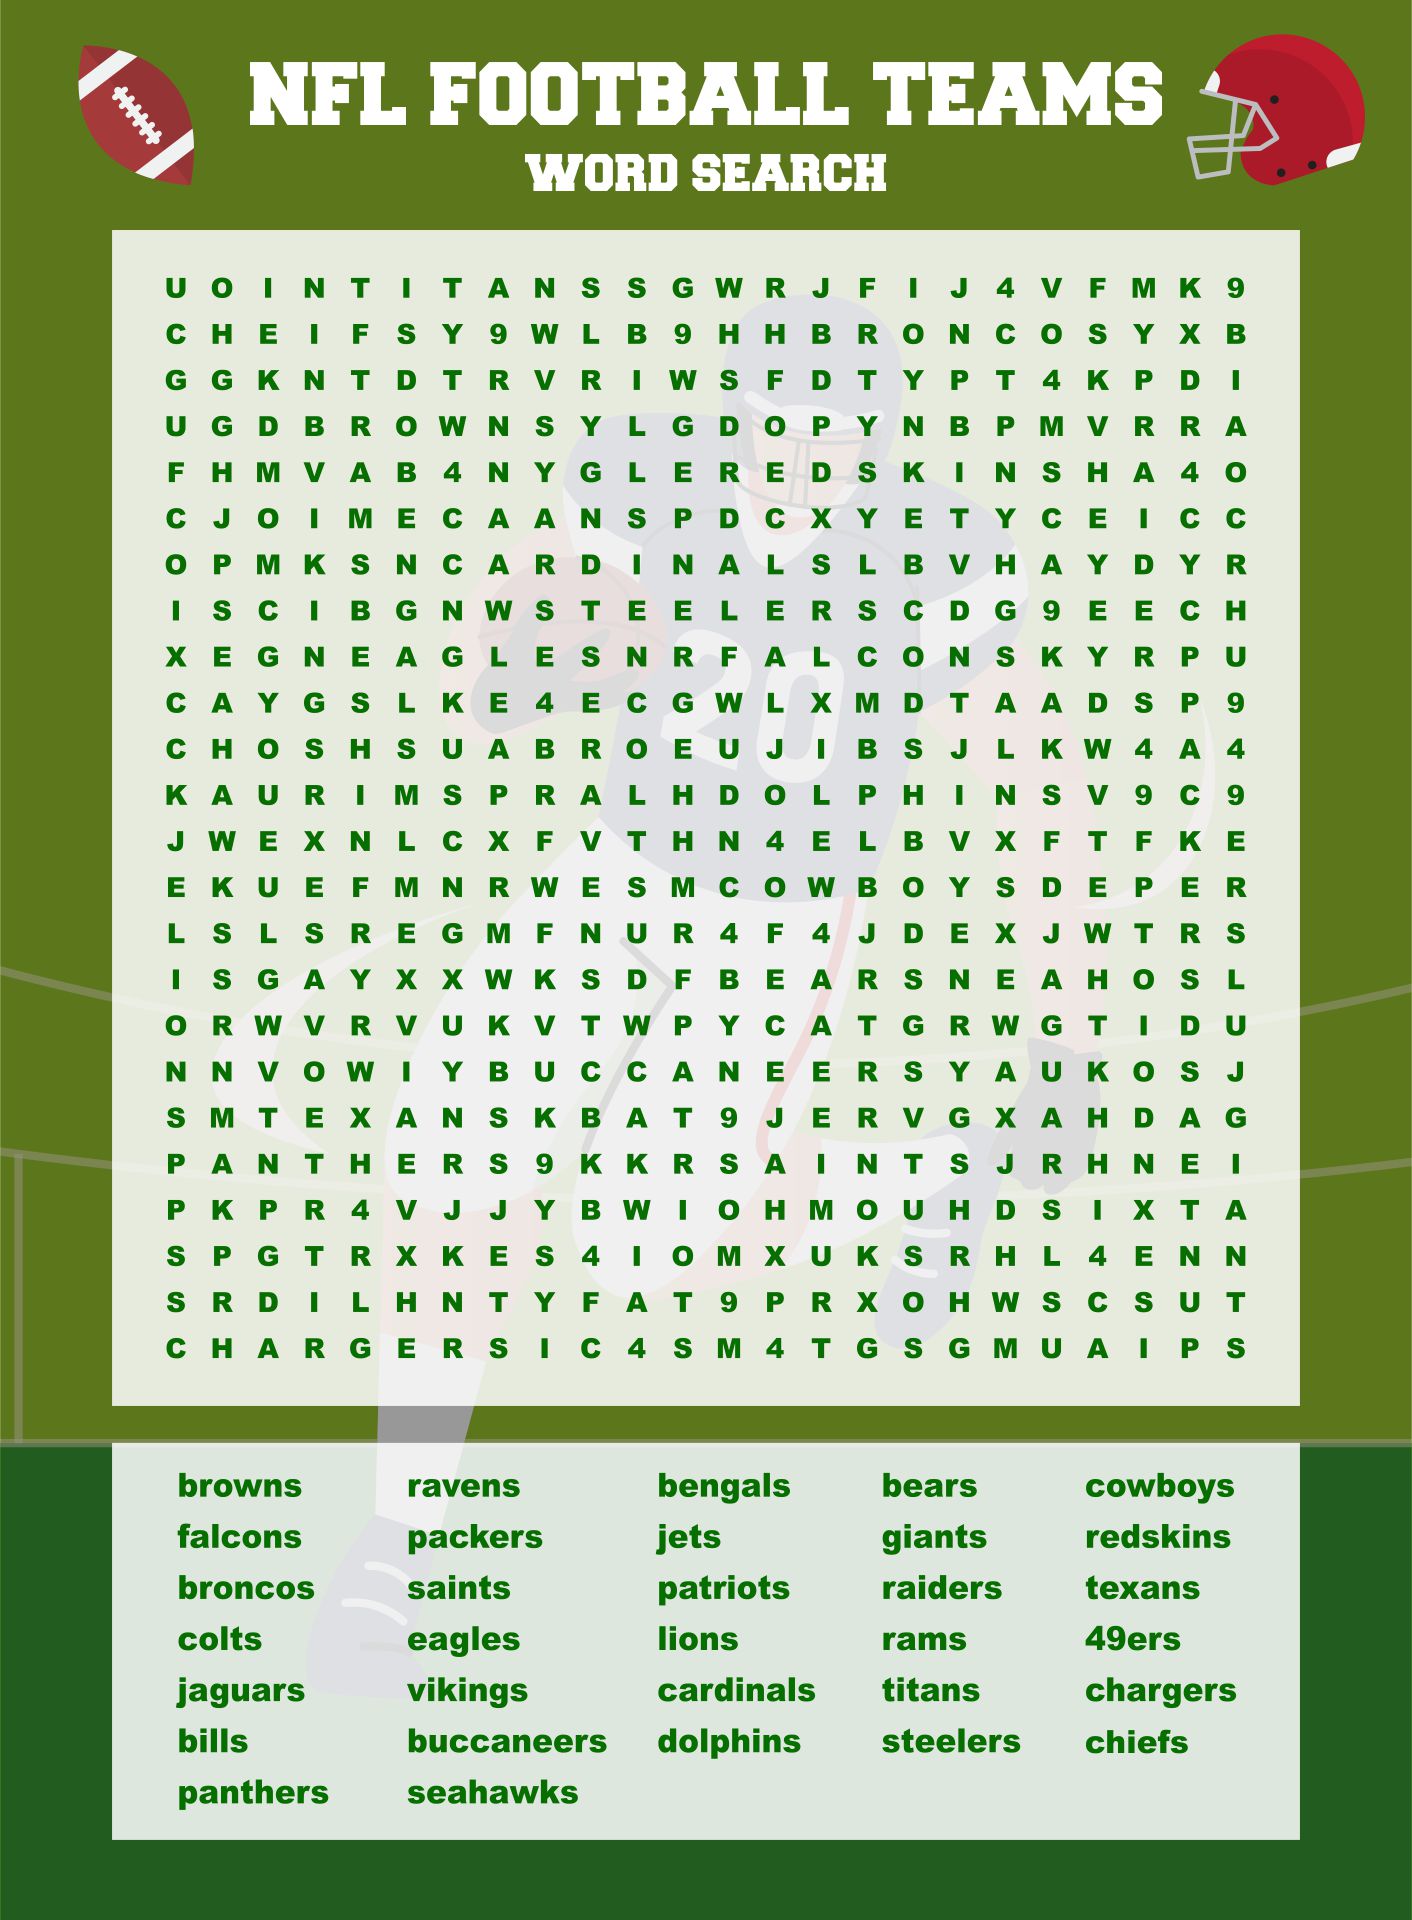 6 Best Images of NFL Football Word Search Printable NFL Word Search